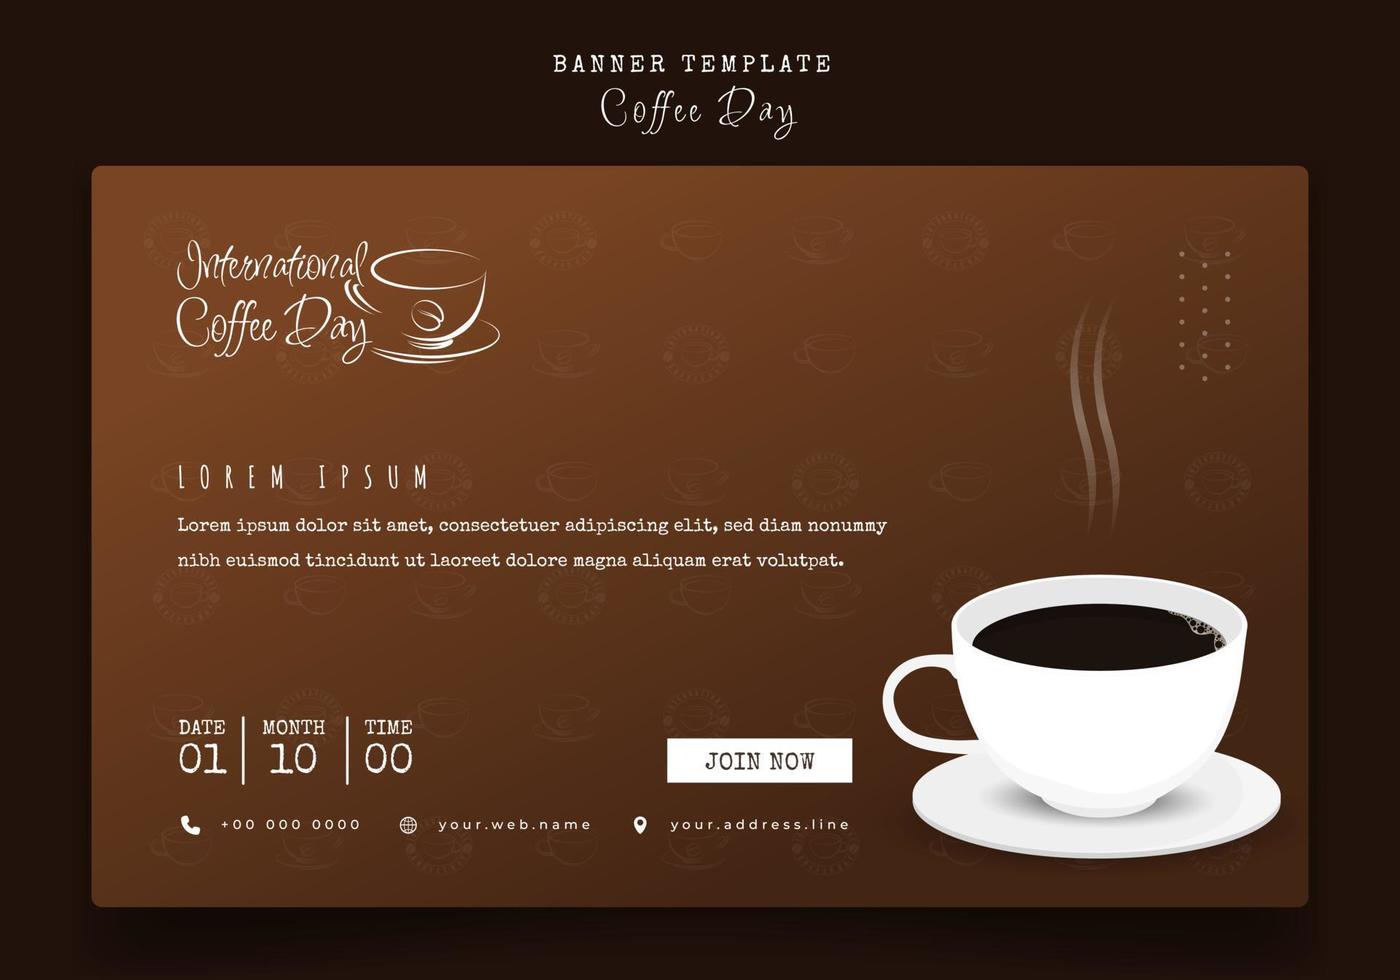 Banner template with coffee design in brown background for coffee day advertisement design vector